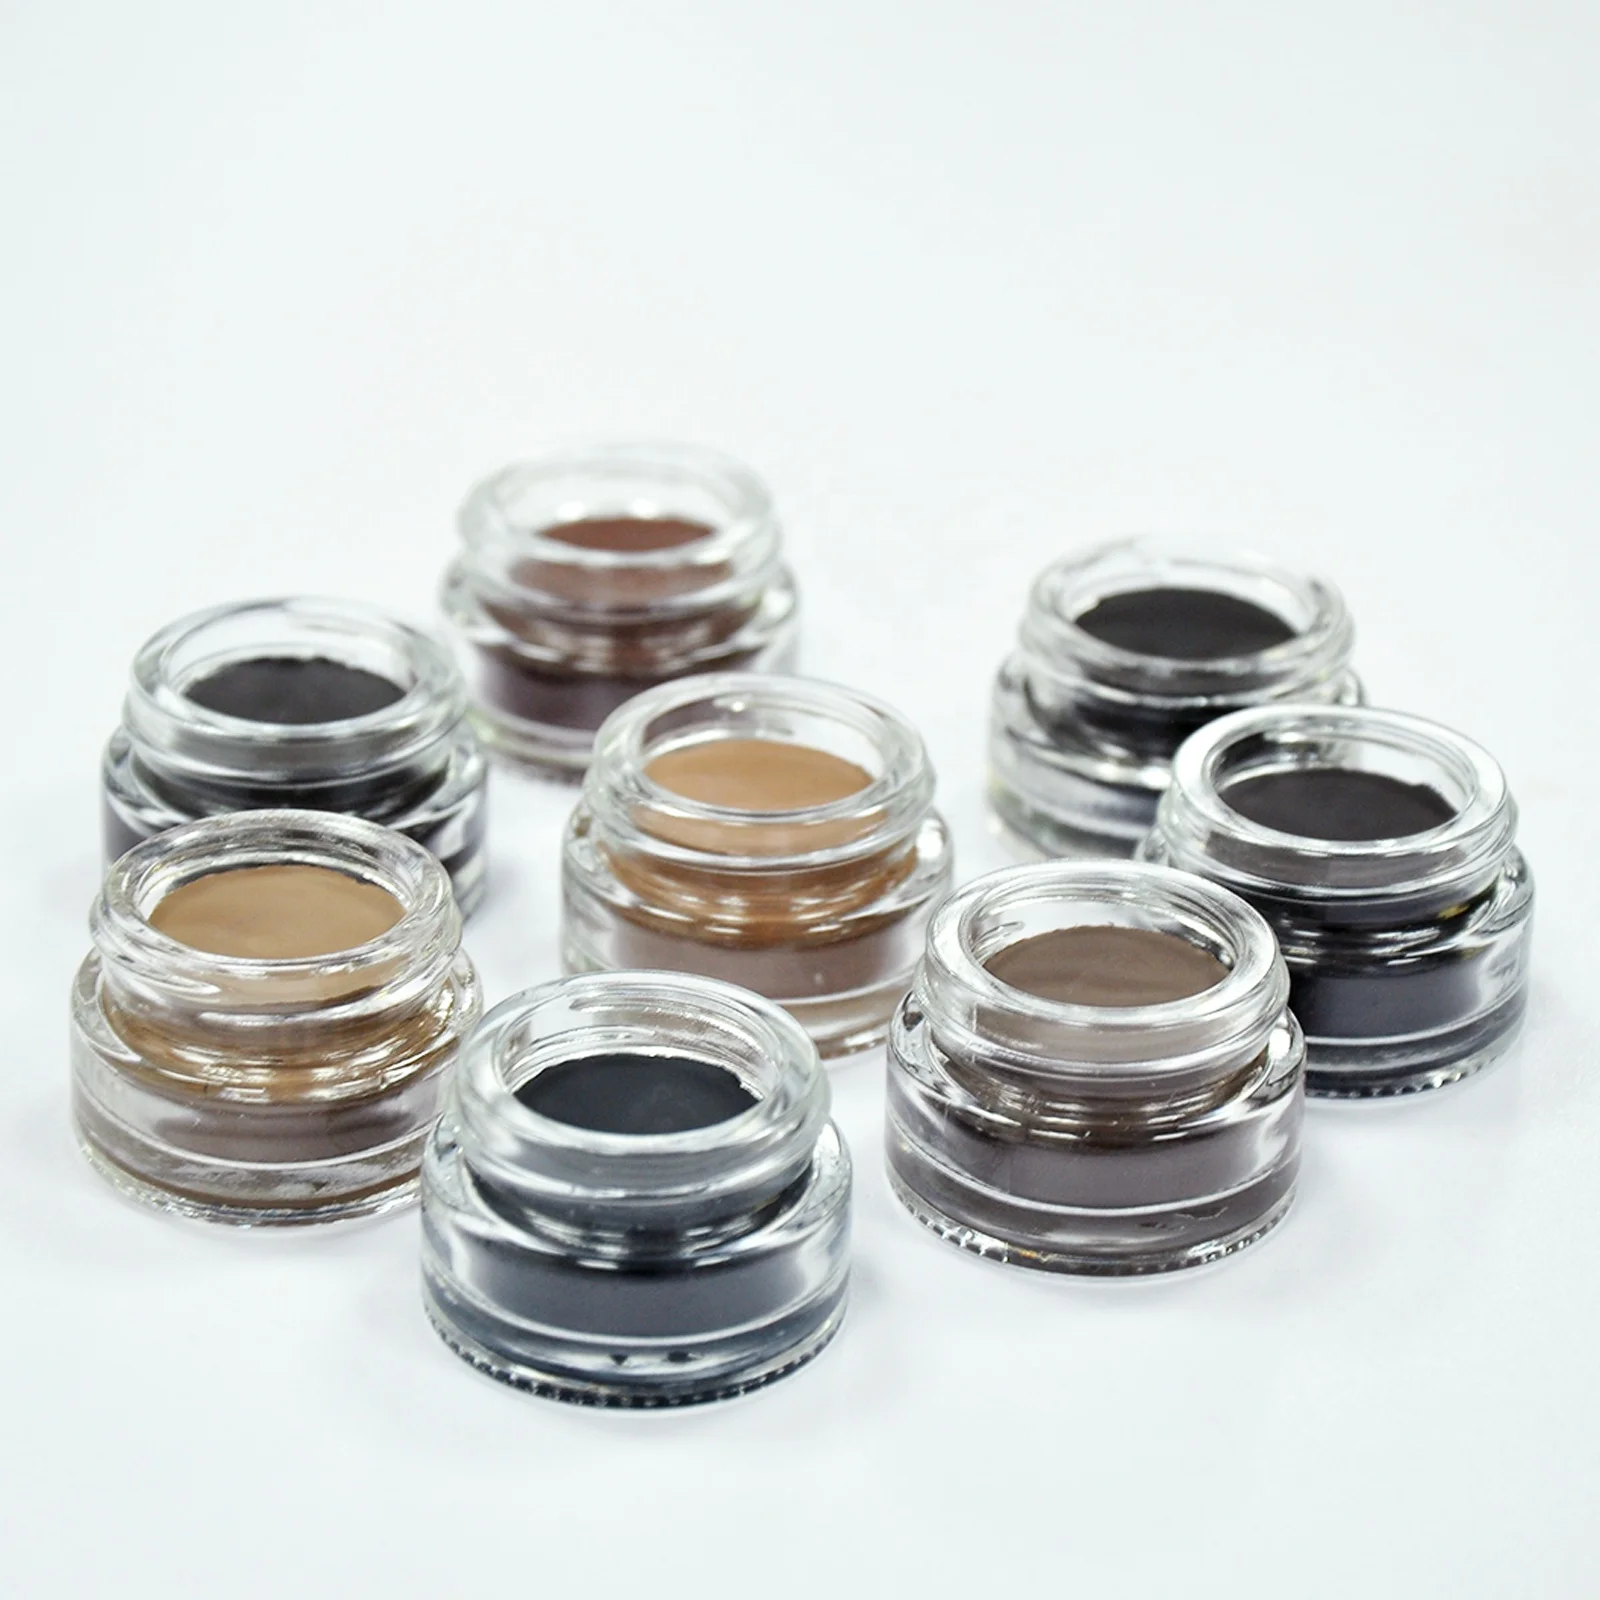 

Wholesale Low Moq Private label Long Wear Eyebrow Gel 8 Colors Waterproof Eyebrow Pomade, 8 color, can be customized